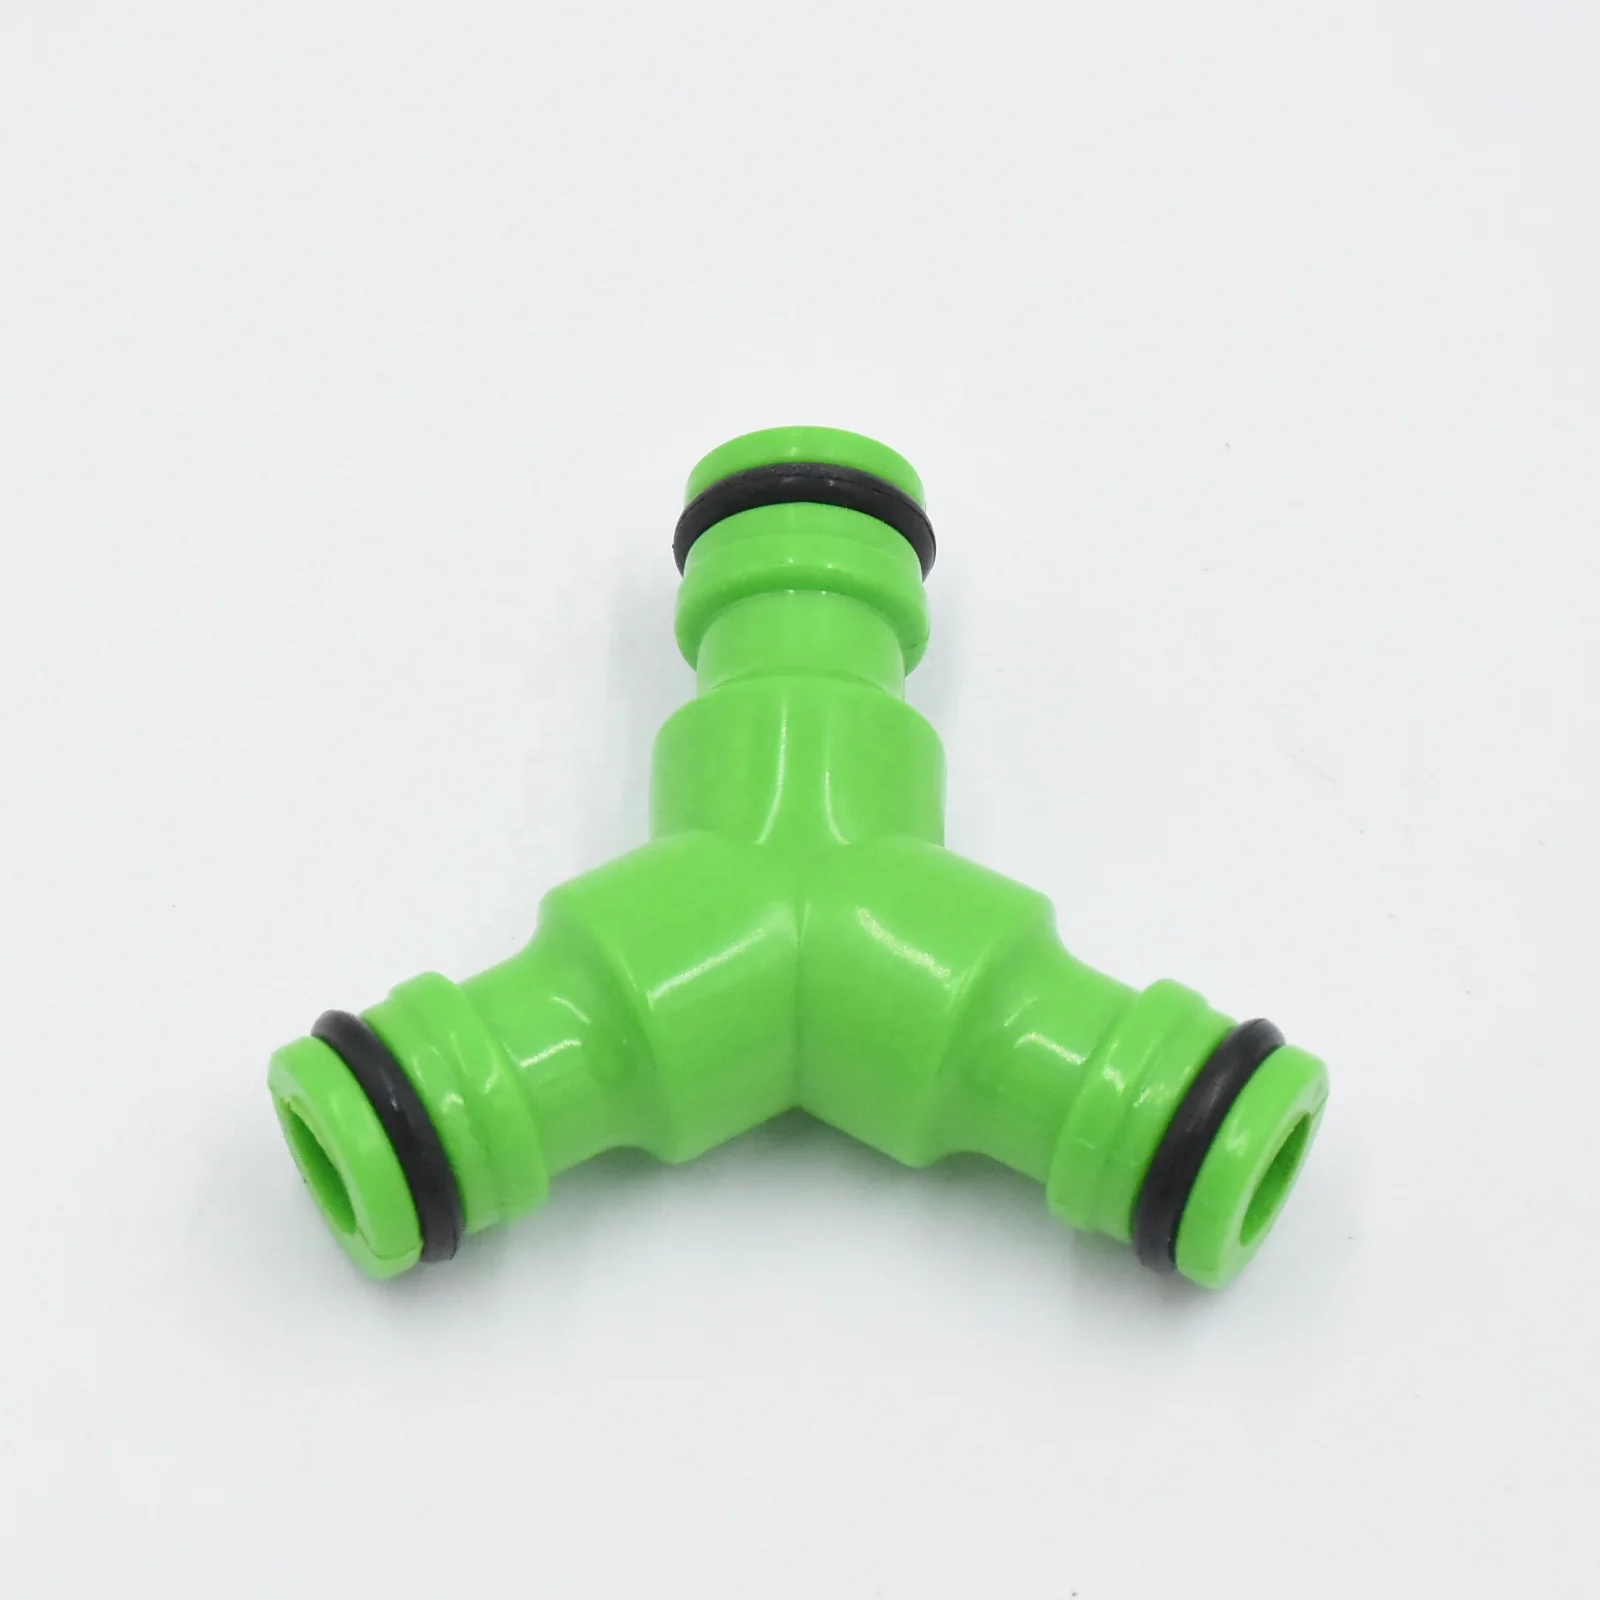 China factory universal Y shape quick connector plastic 3 ways quick connector adapter promotion ABS plastic quick hose splitter